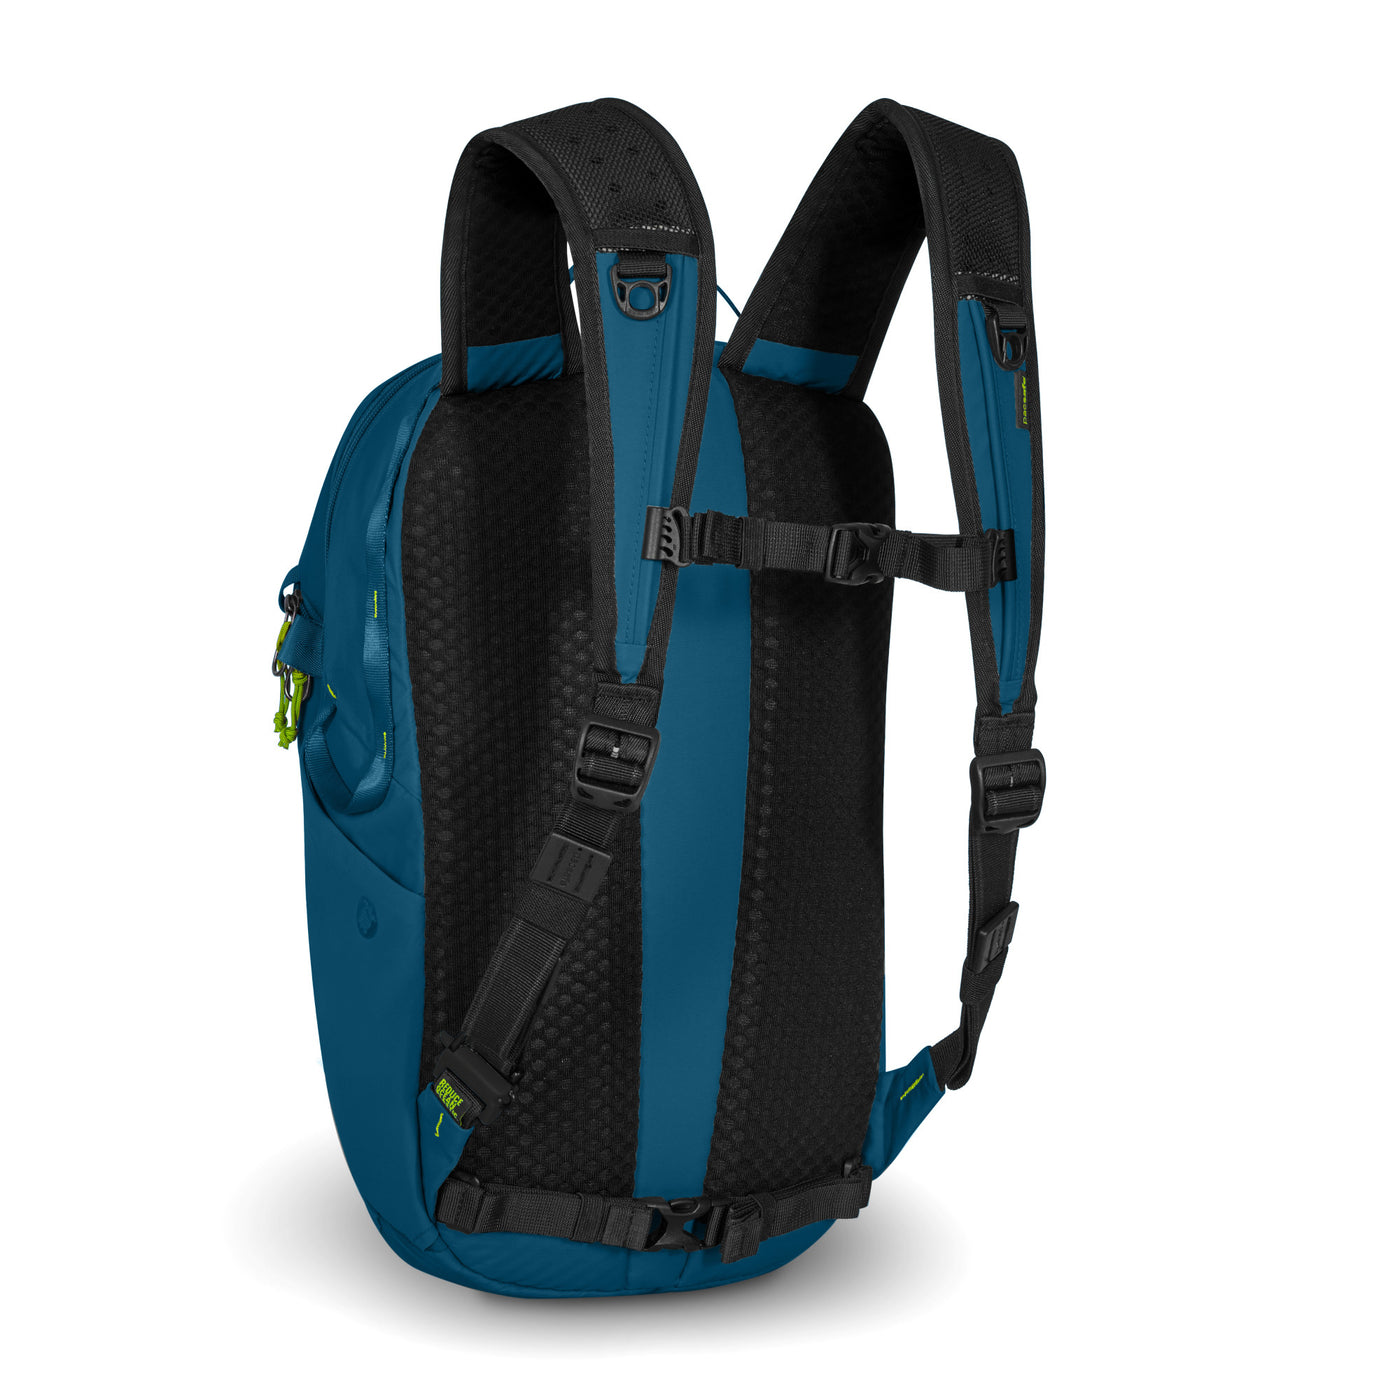 PacsafeECO 18L Backpack